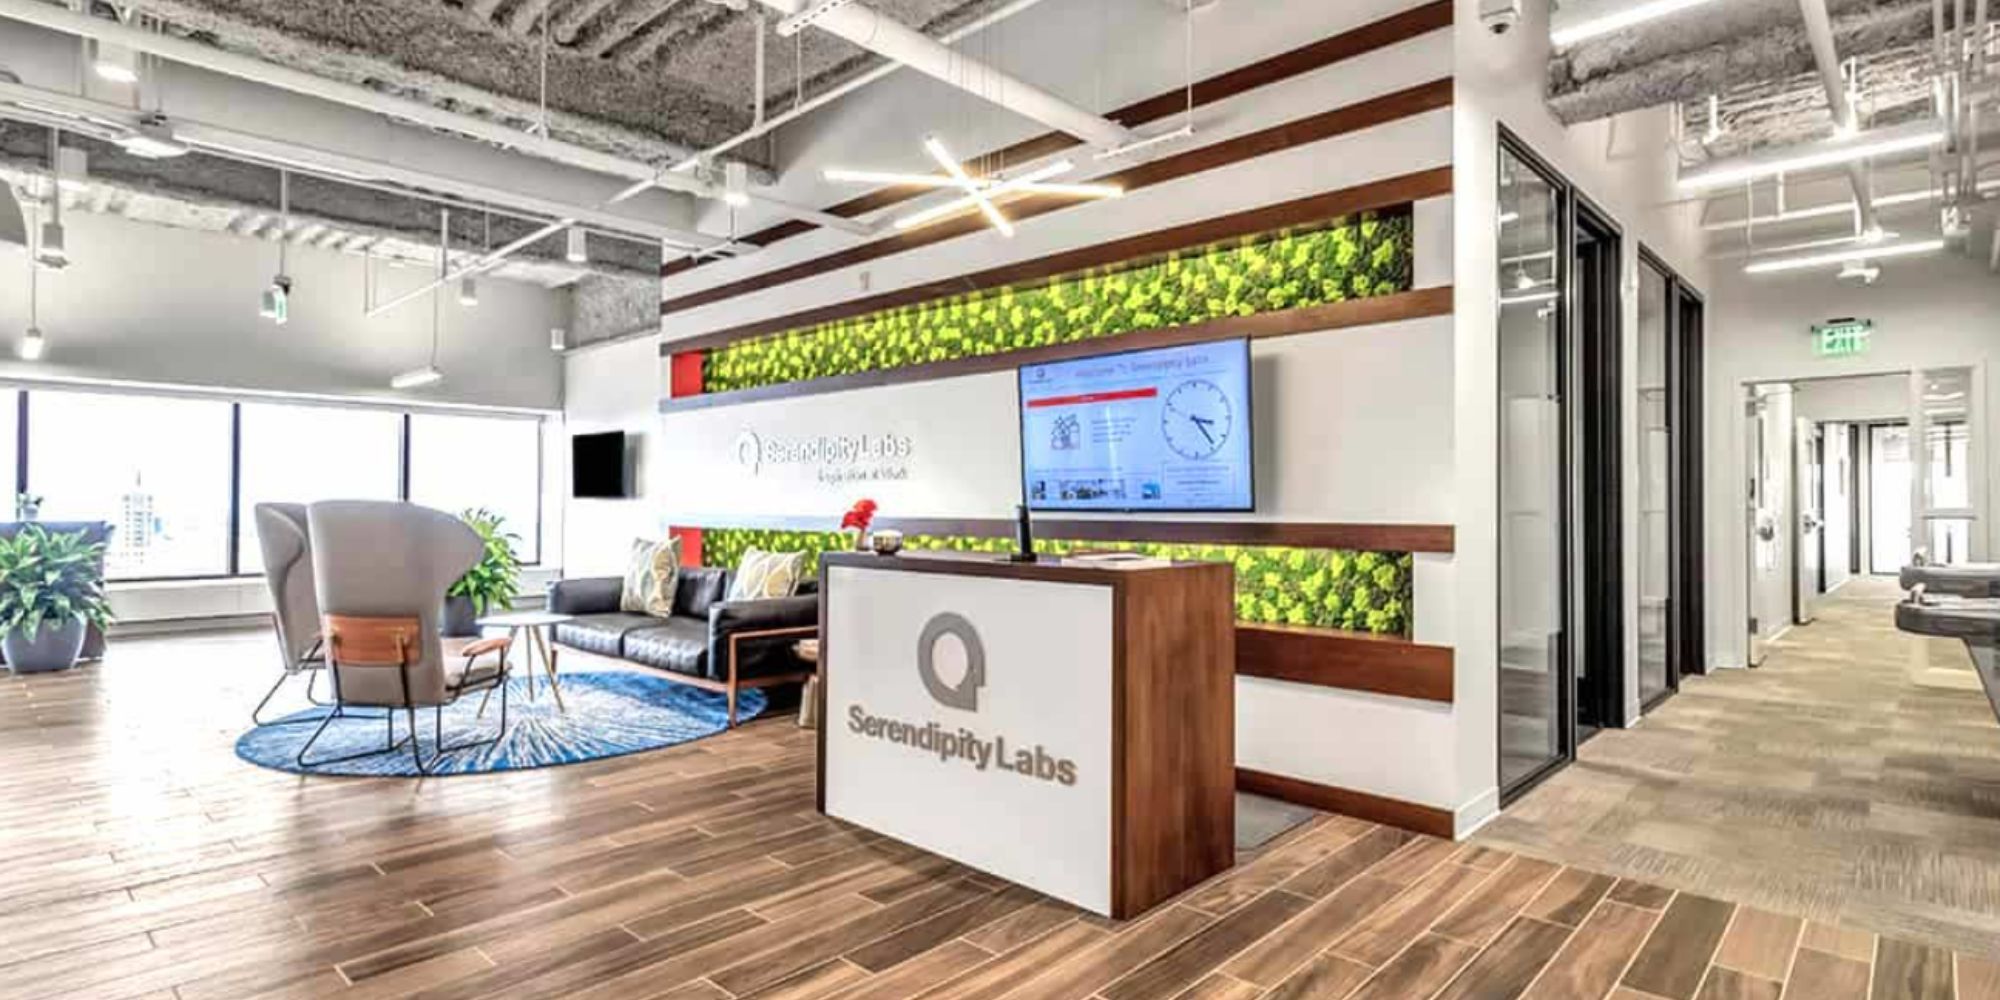 Serendipity Labs to open upscale on-demand office space in Seneca One Tower